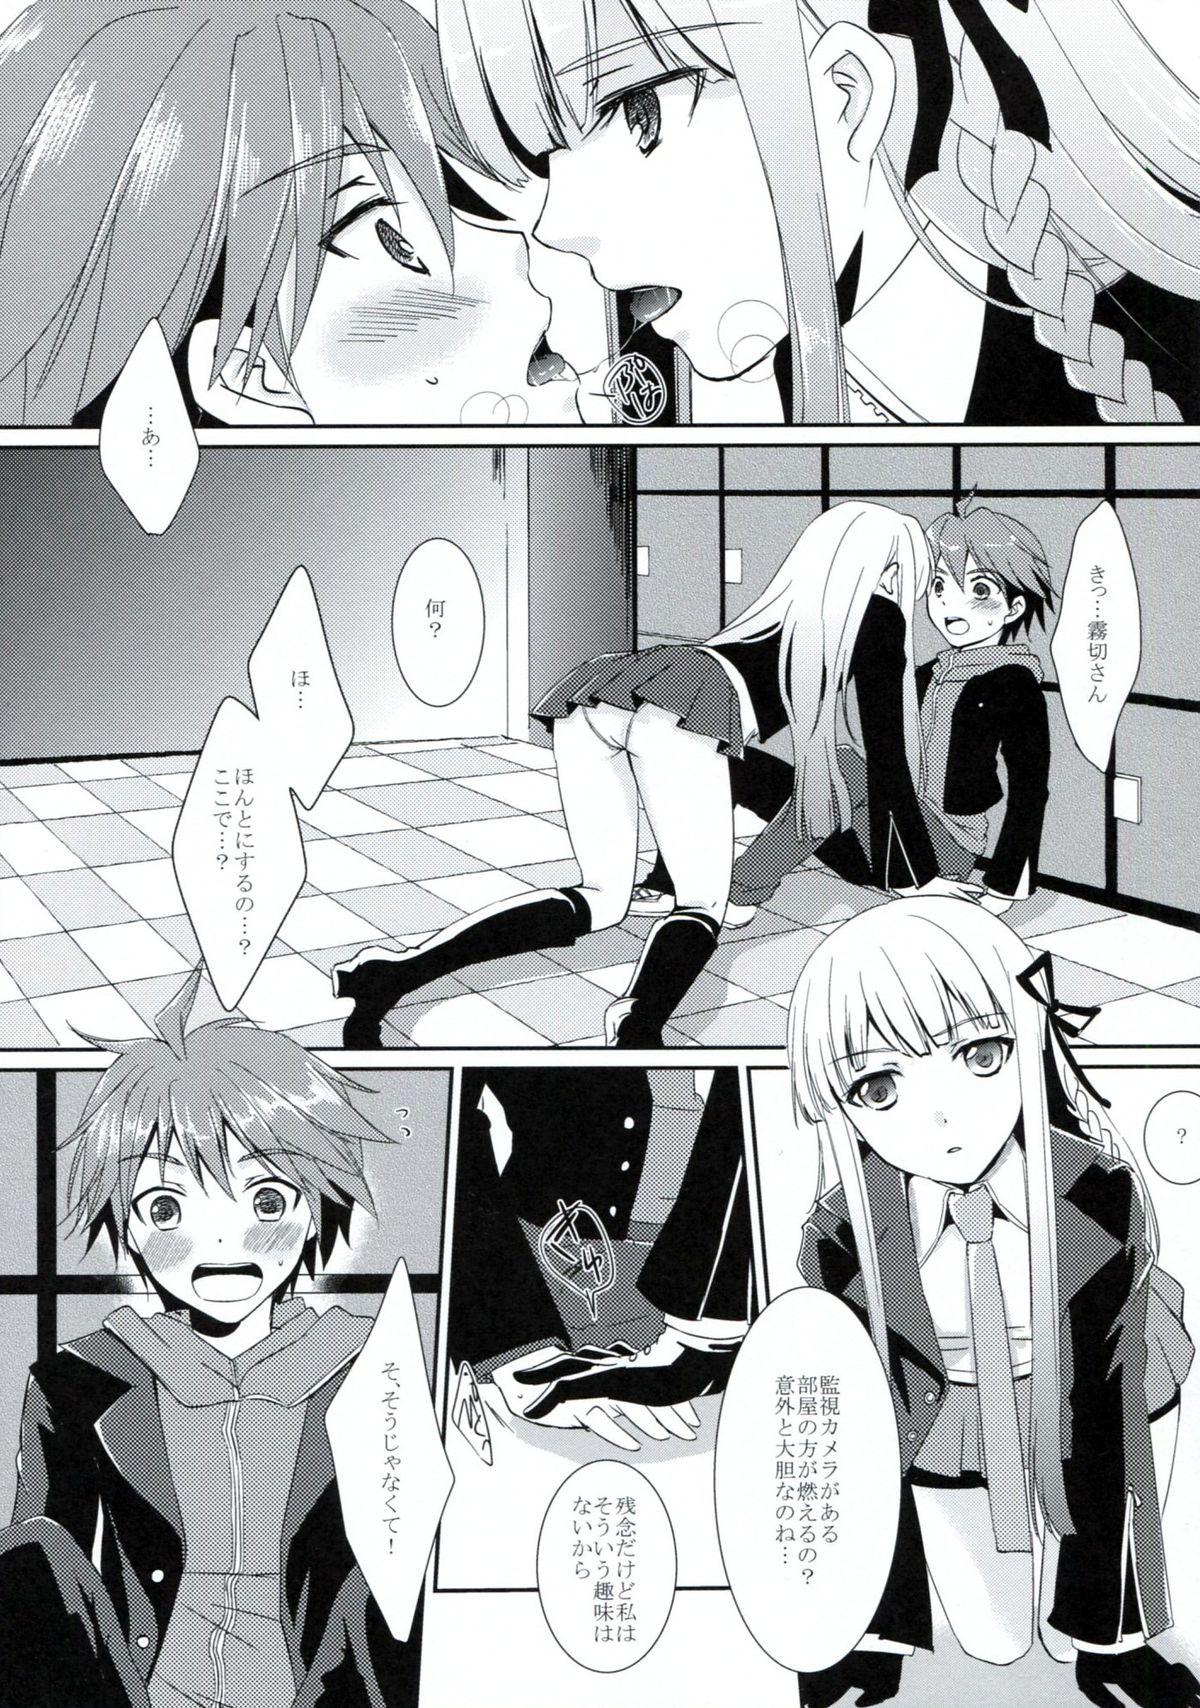 Real Amature Porn Synchronicity - Danganronpa Free Oral Sex - Page 4